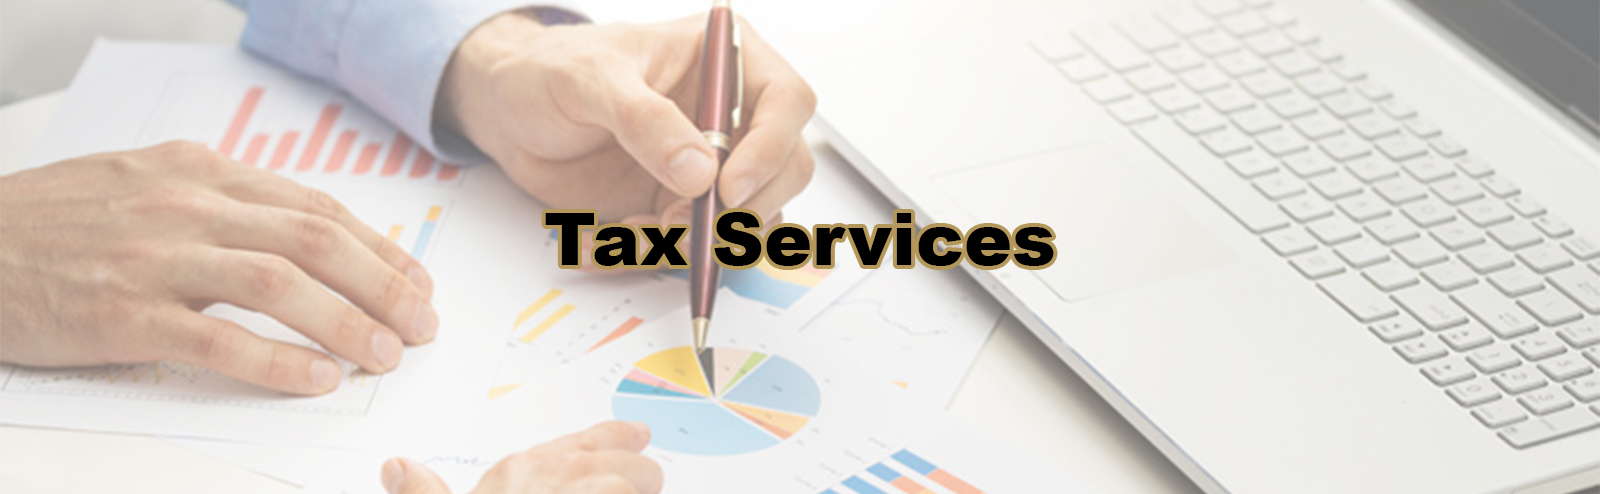 tax services banner